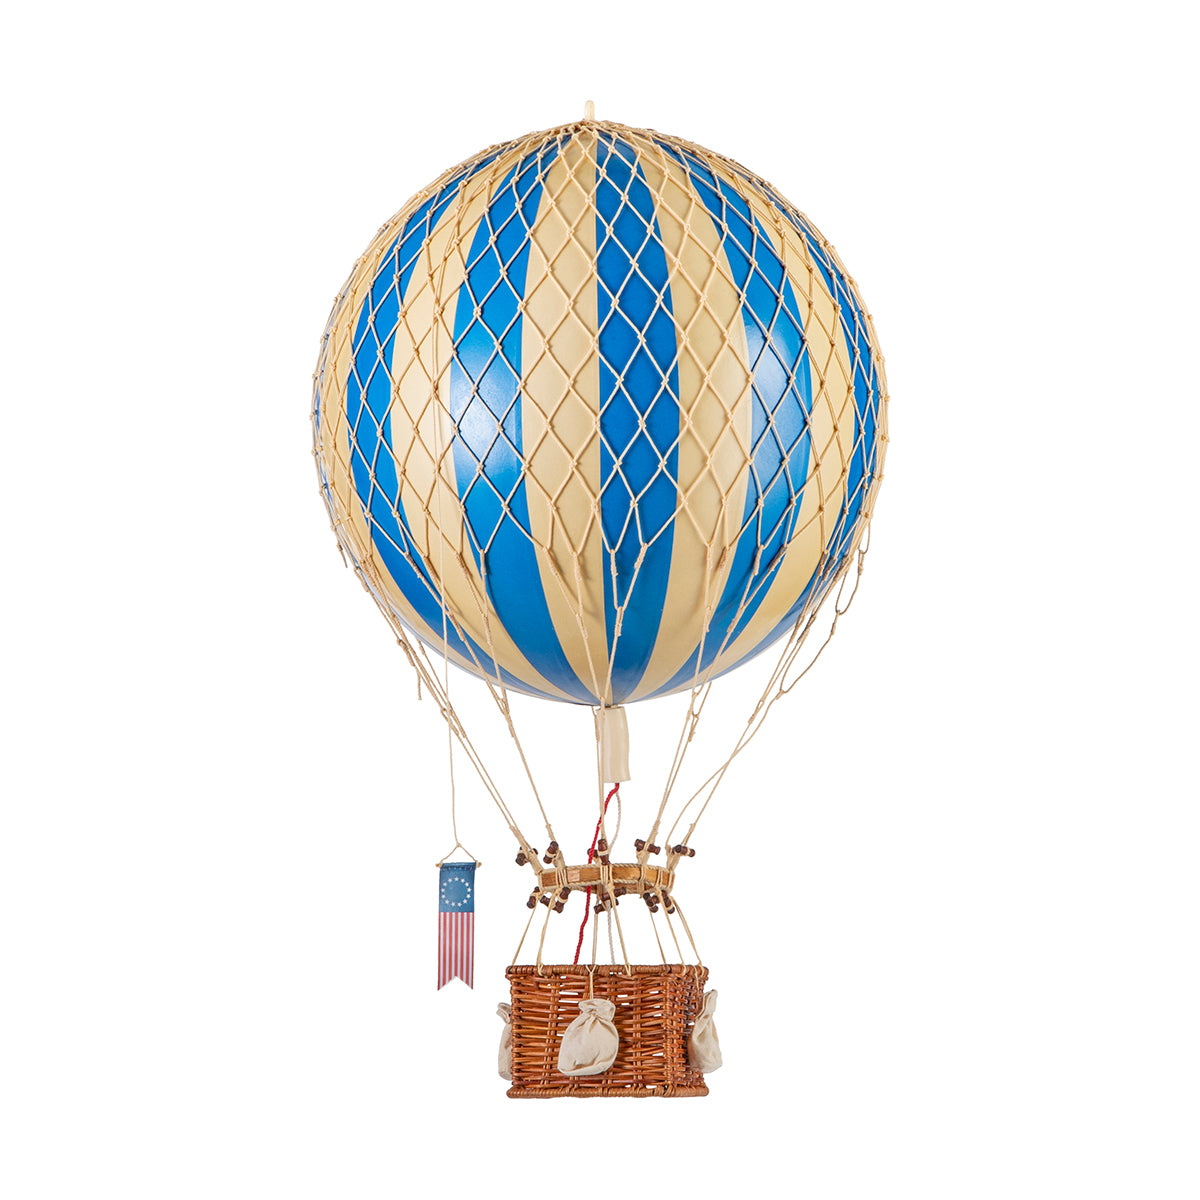 Soar to new heights with a unique perspective as you embark on a journey in the Wonderen Medium Hot Air Balloon - Royal Aero. Picture a mesmerizing scene of a blue and white Wonderen hot air balloon gracefully floating against the sky.